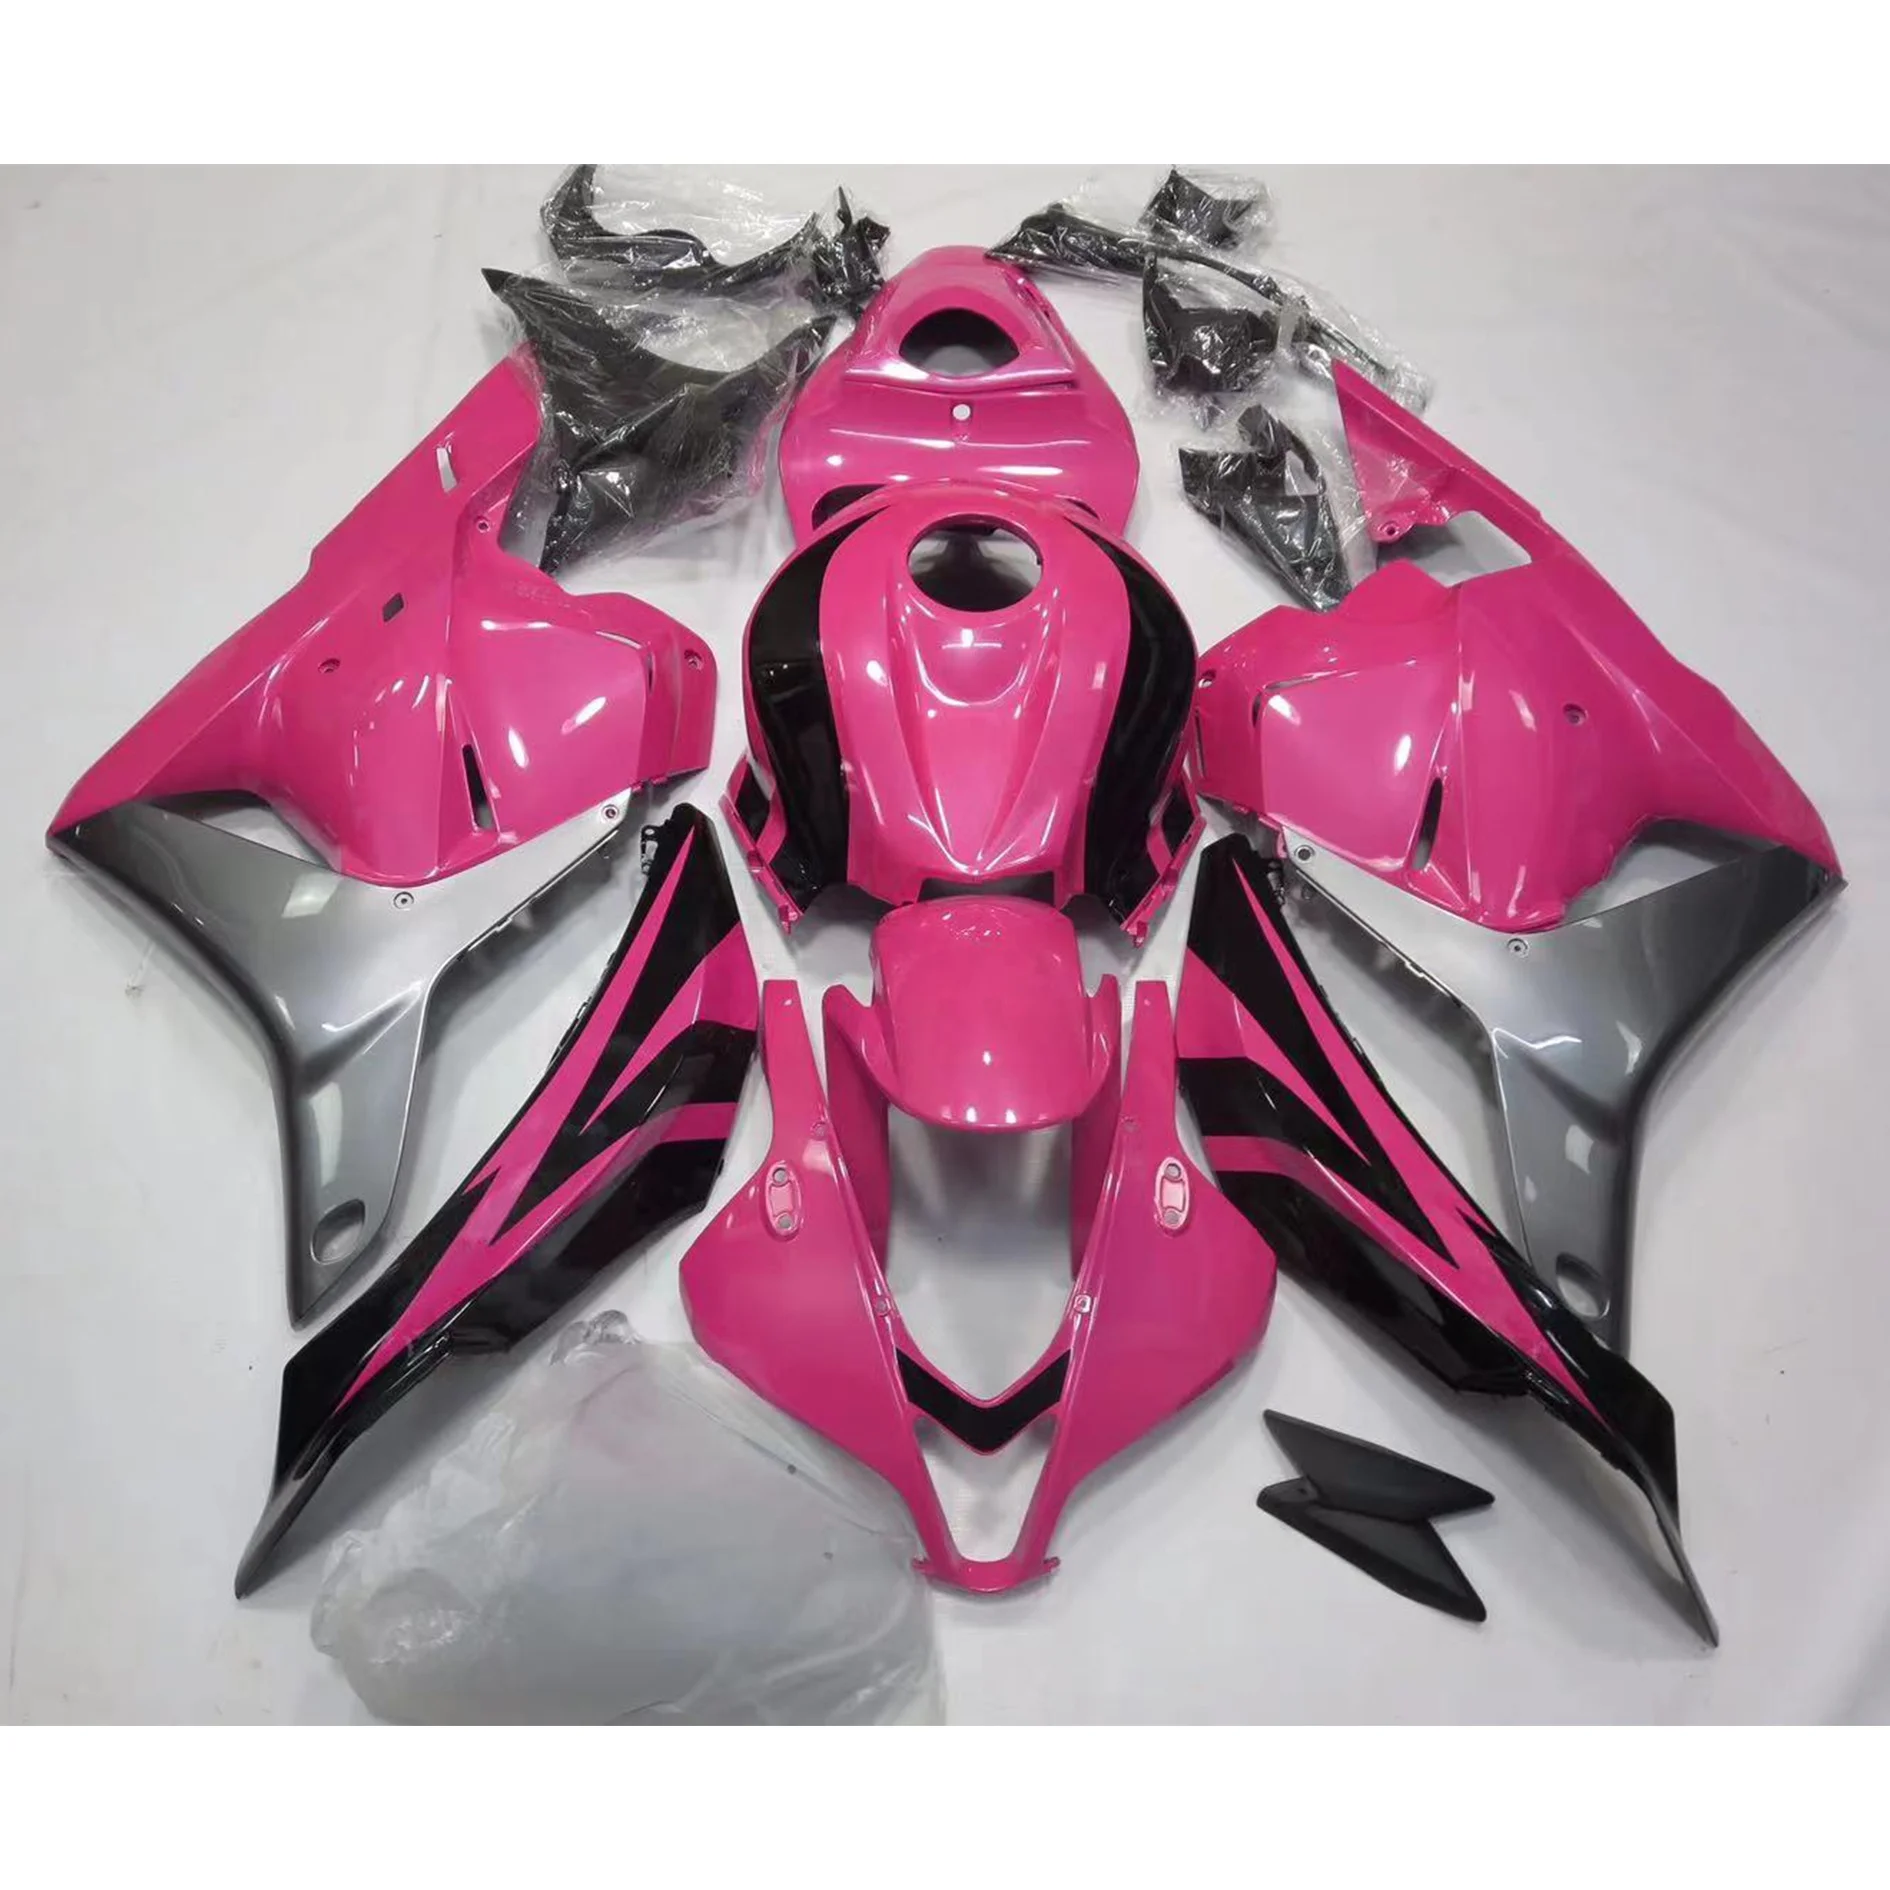 

2022 WHSC Silver And Pink Motorcycle Accessories For HONDA CBR600 RR 2009-2012 09 10 11 12 Motorcycle Body Systems Fairing Kits, Pictures shown